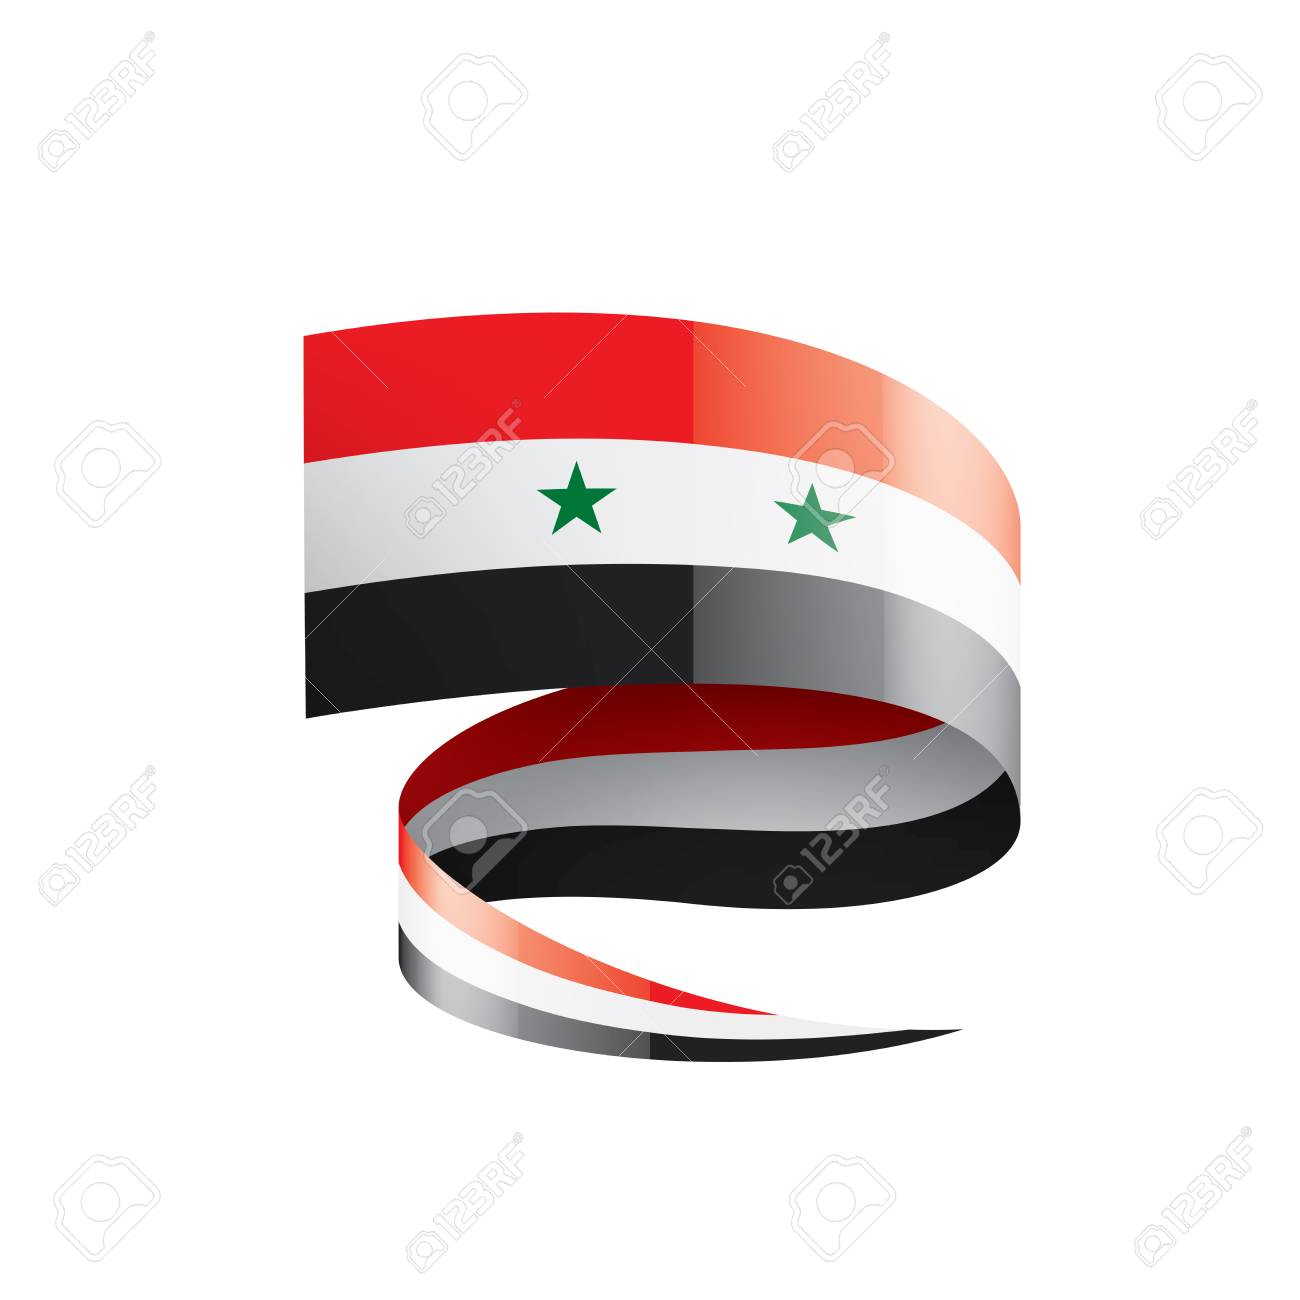 Syria Flag Vector Illustration On A White Background Royalty